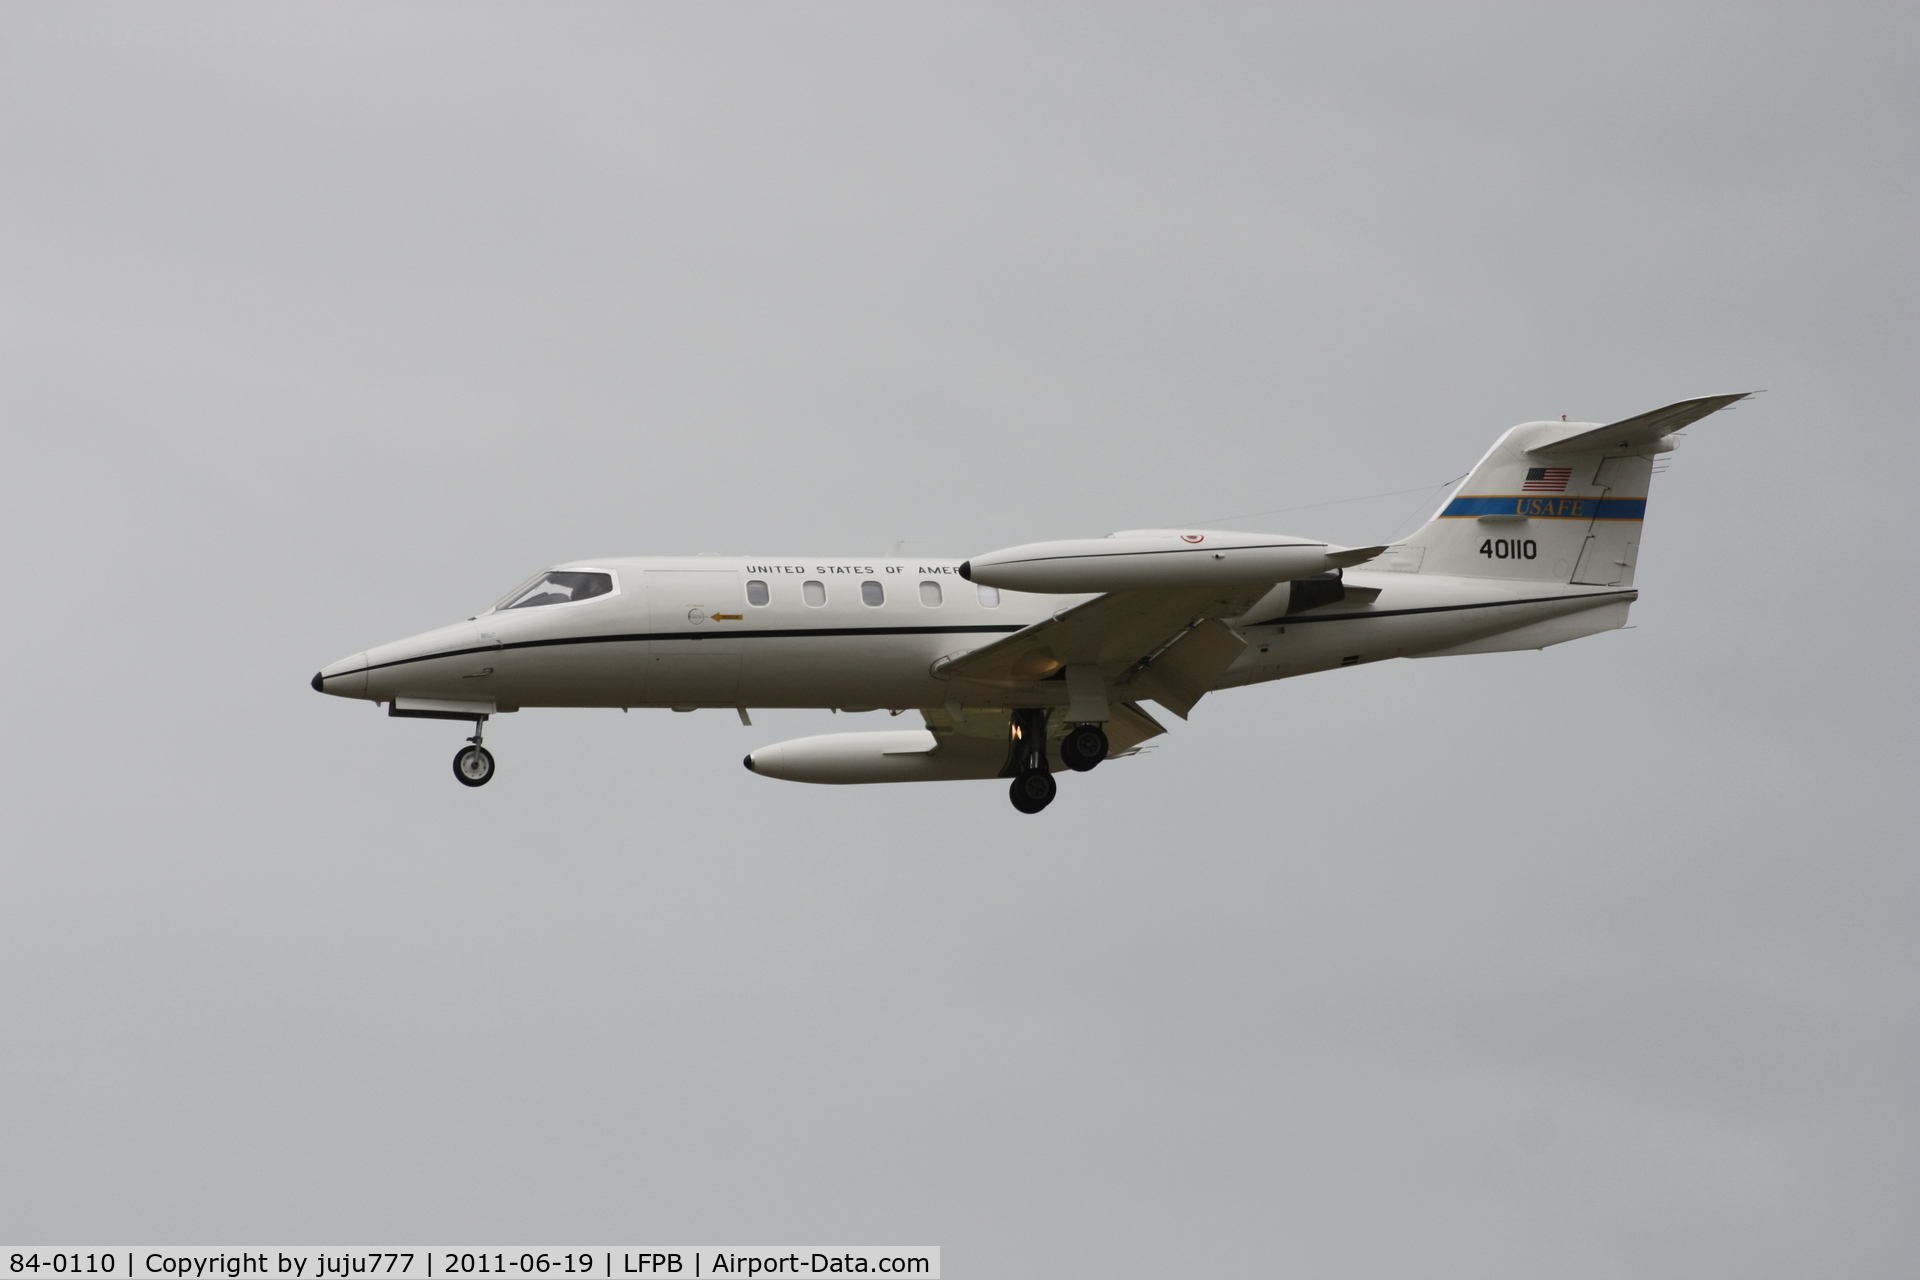 84-0110, 1984 Gates Learjet C-21A C/N 35A-556, on transit at Le Bourget